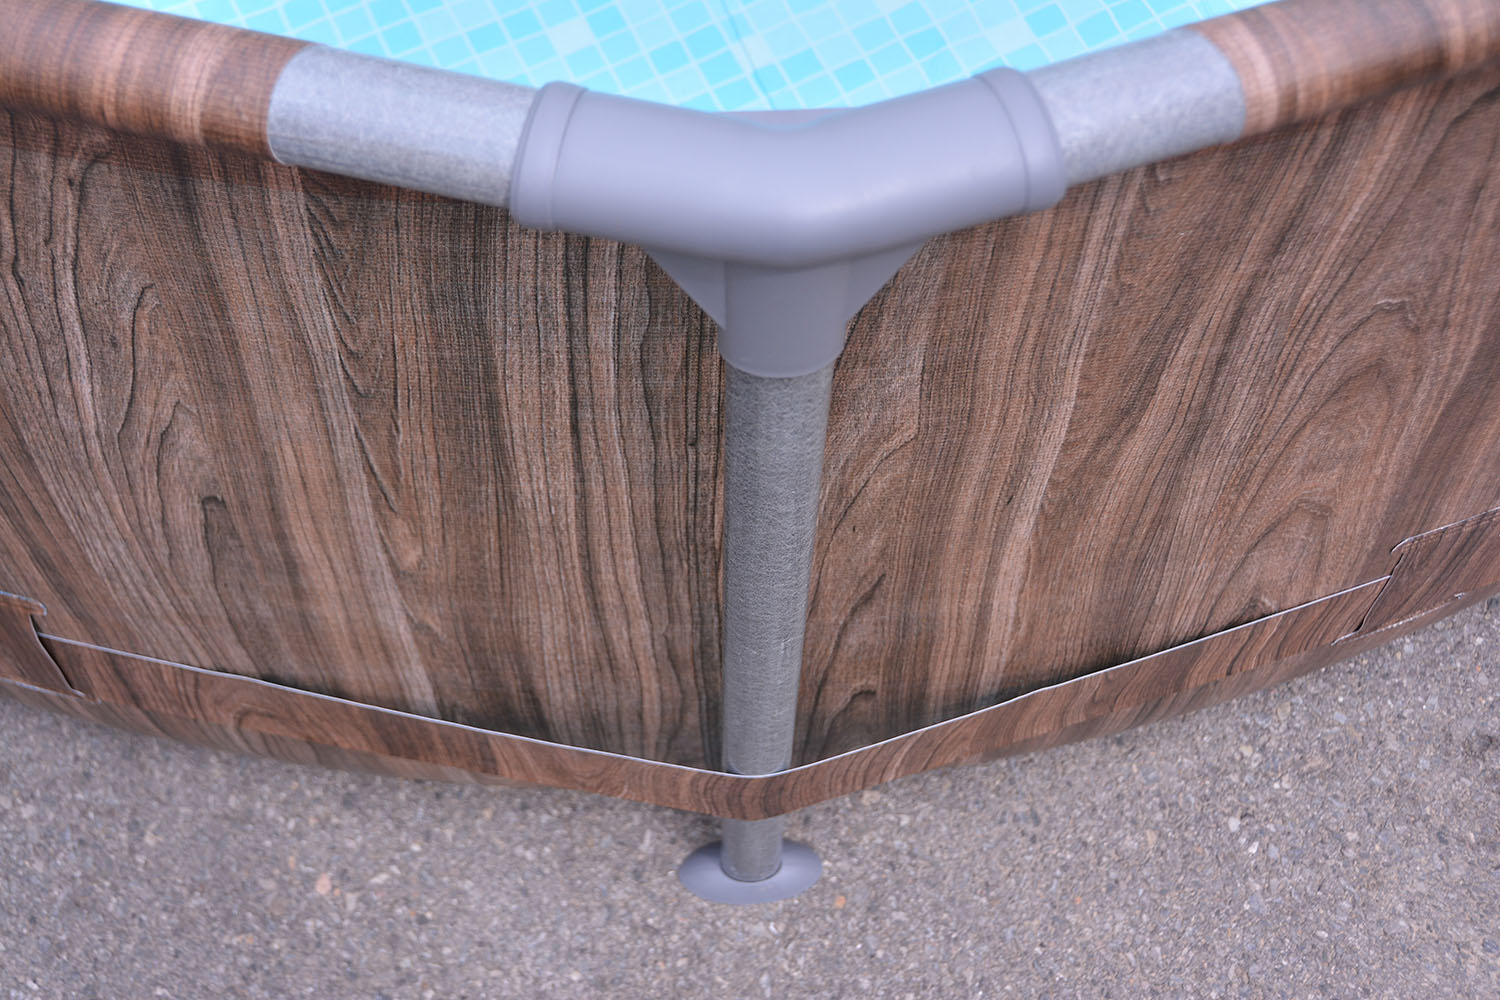 Avenli 10' x 30" Wood Pattern Premium Round Fiberglass Frame Above Ground Pool with Accessories - image 5 of 7